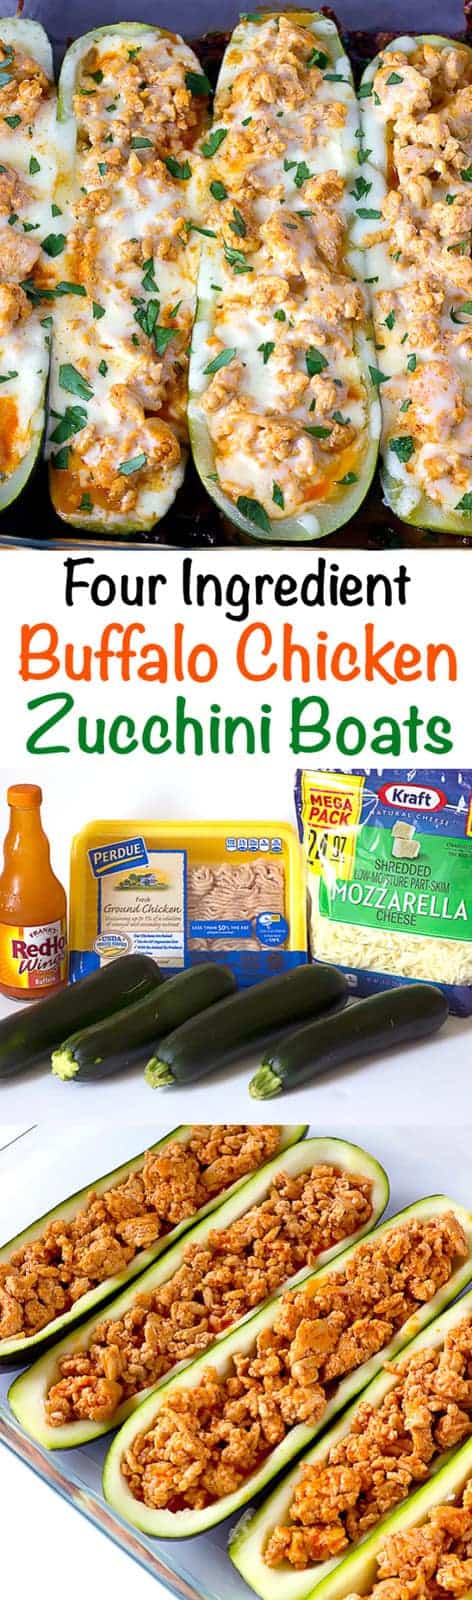 3 image collage with text showing making Buffalo Chicken Zucchini Boats